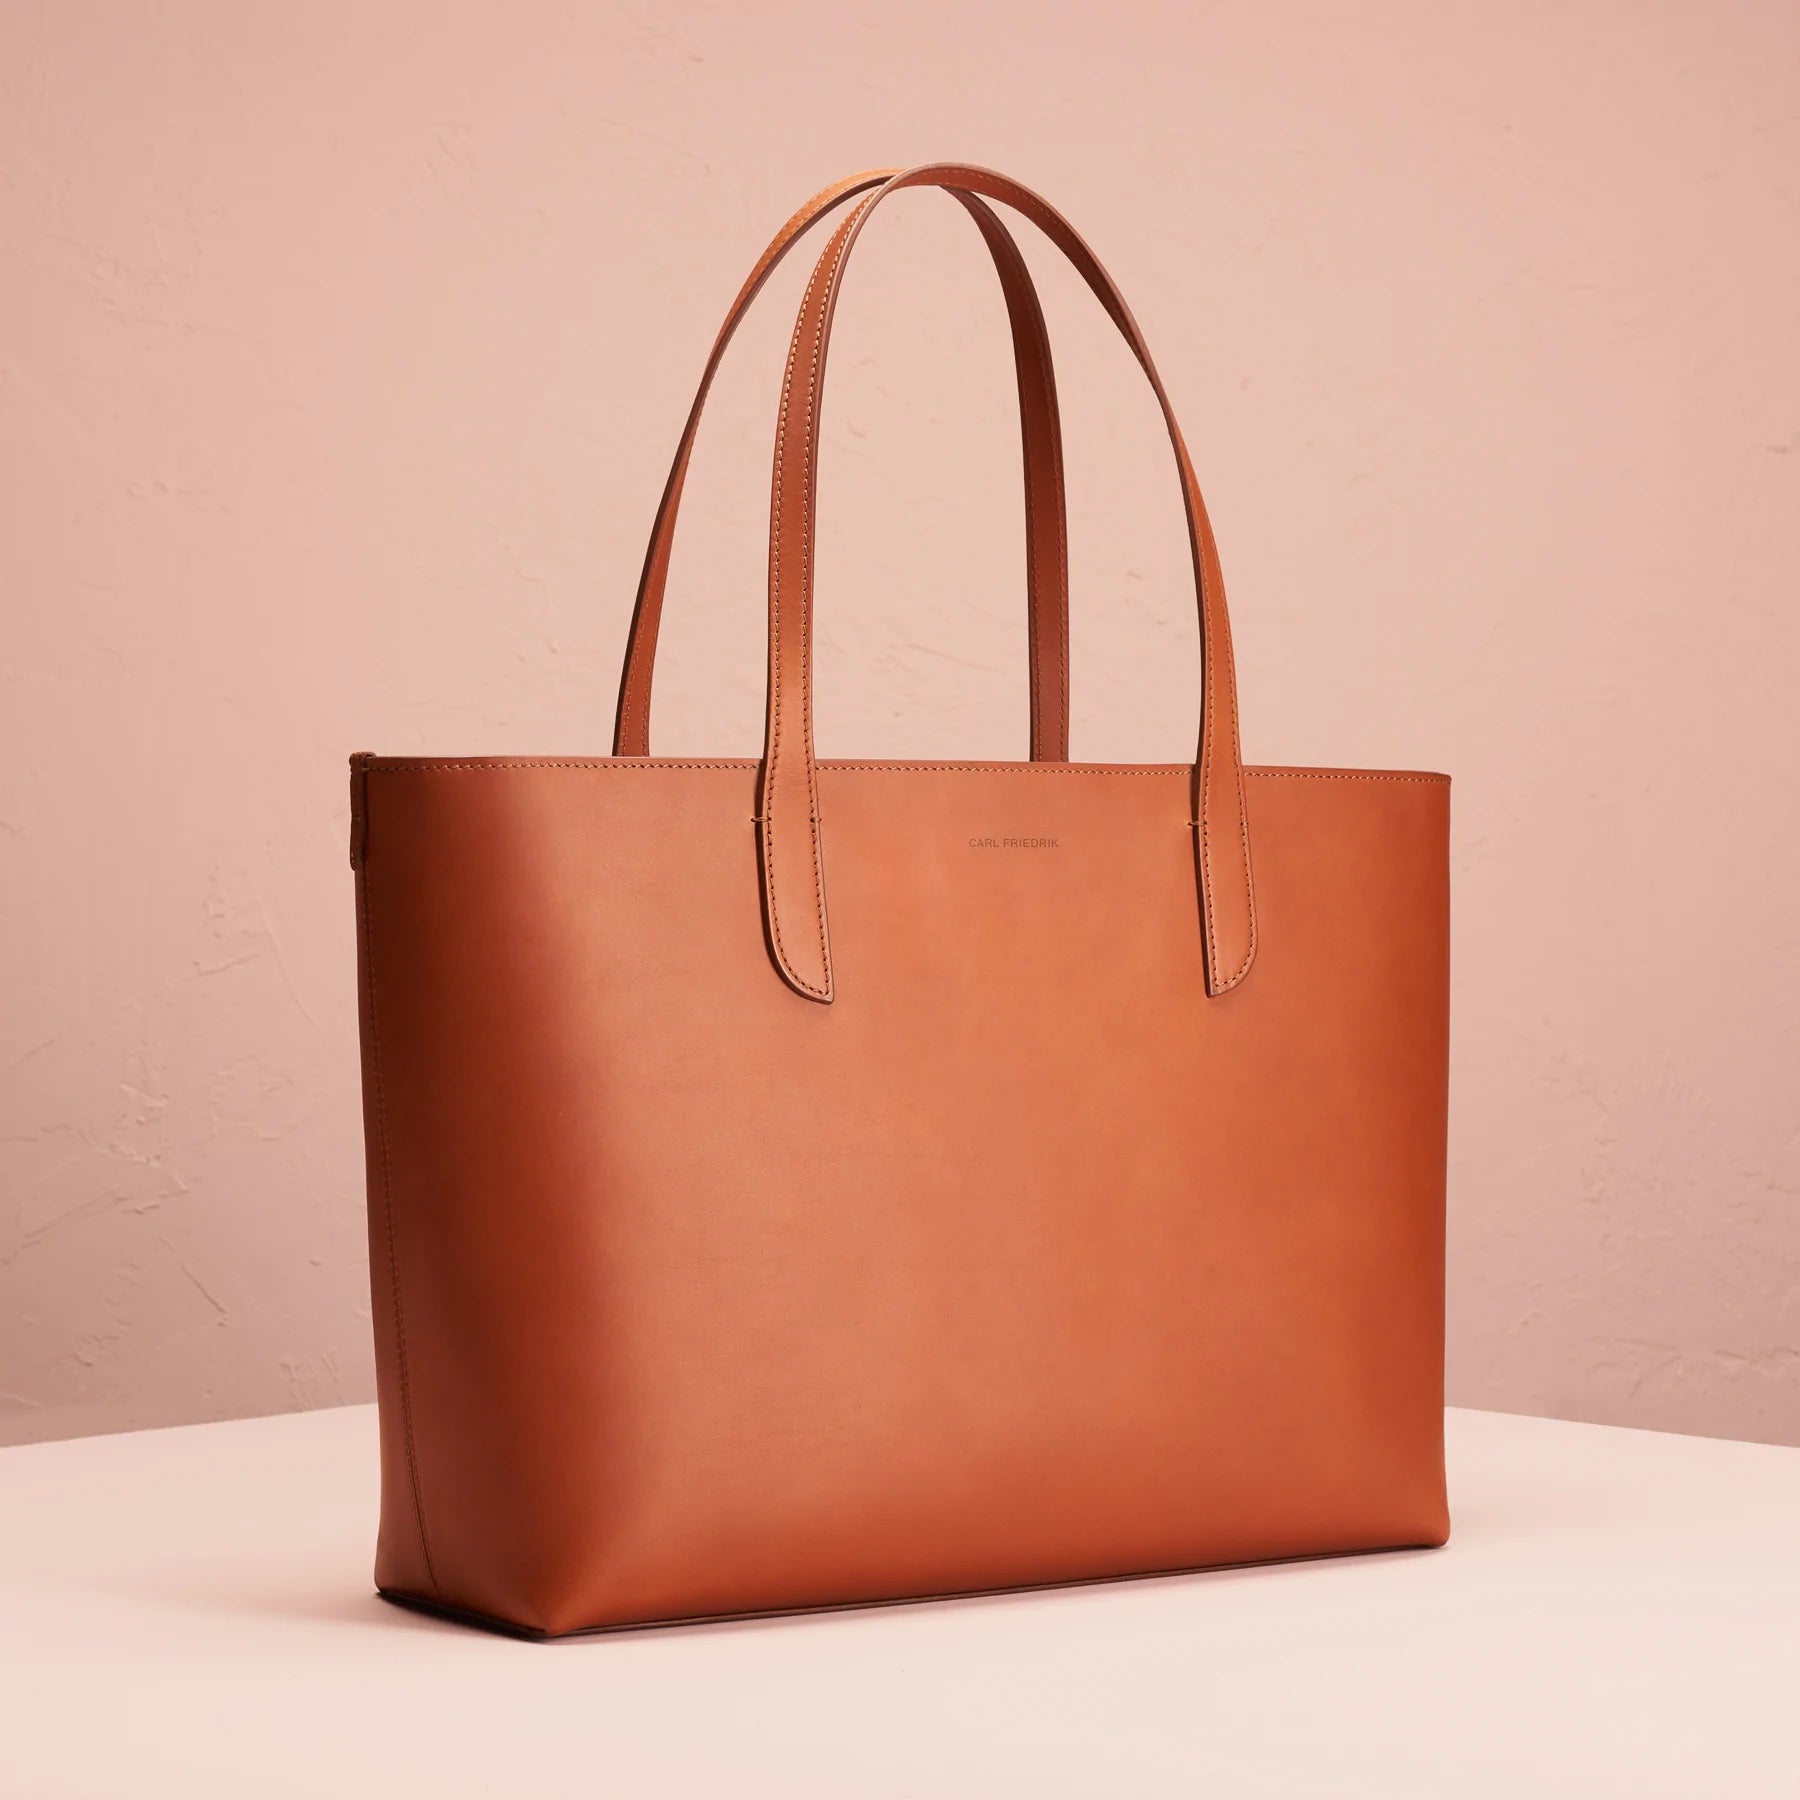 Ashby - Return Cognac / grey Women's leather tote - Fair condition